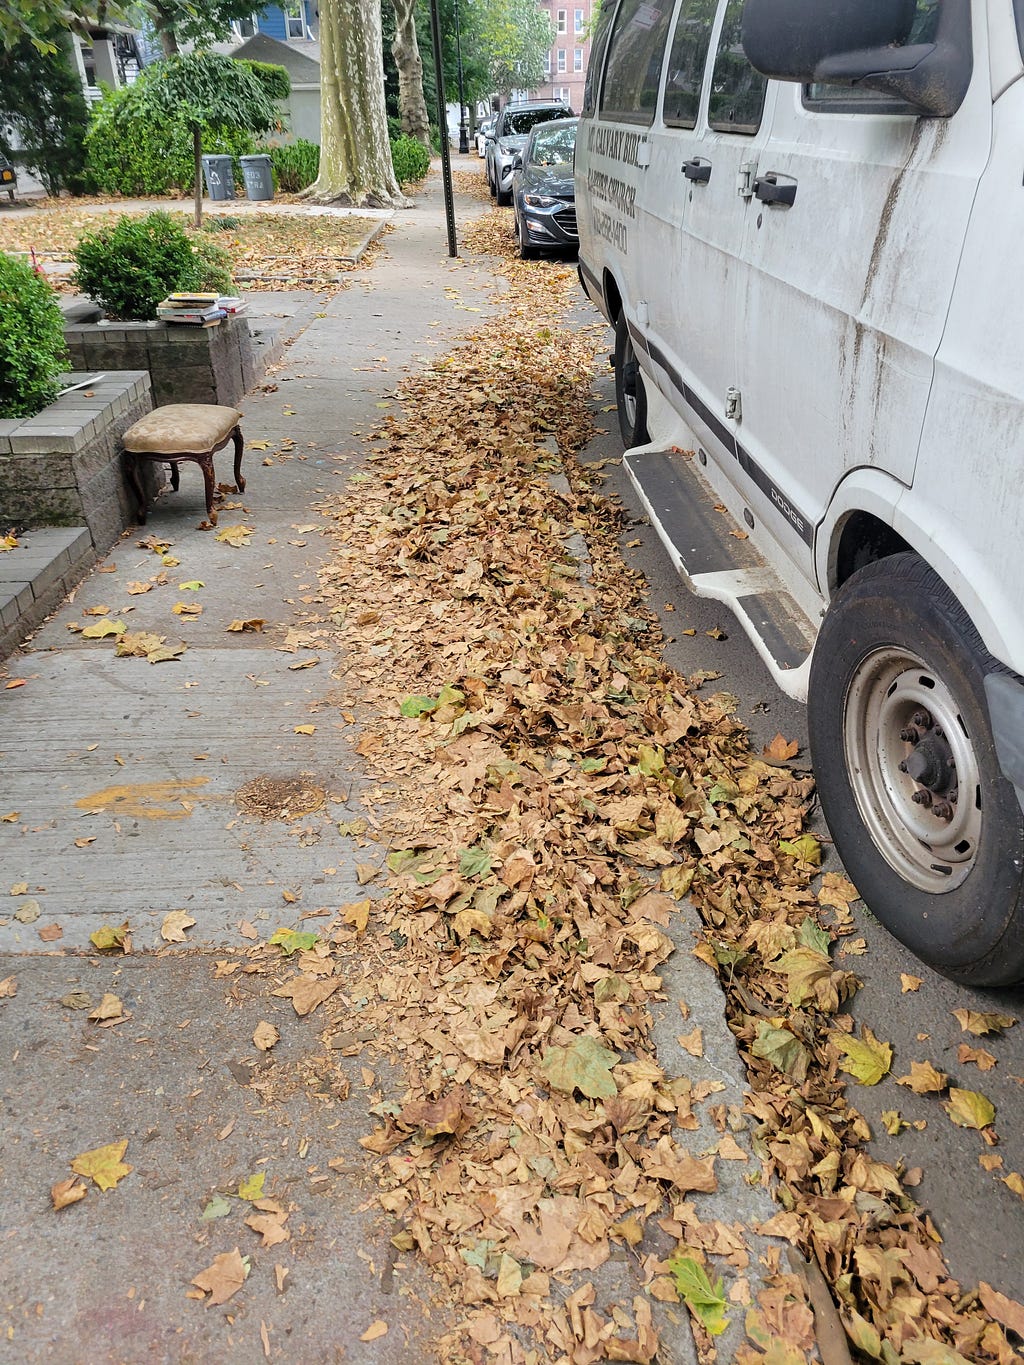 Looking down a sidewalk, the curb obscured with piles of dead leaves, July 22, 2022.